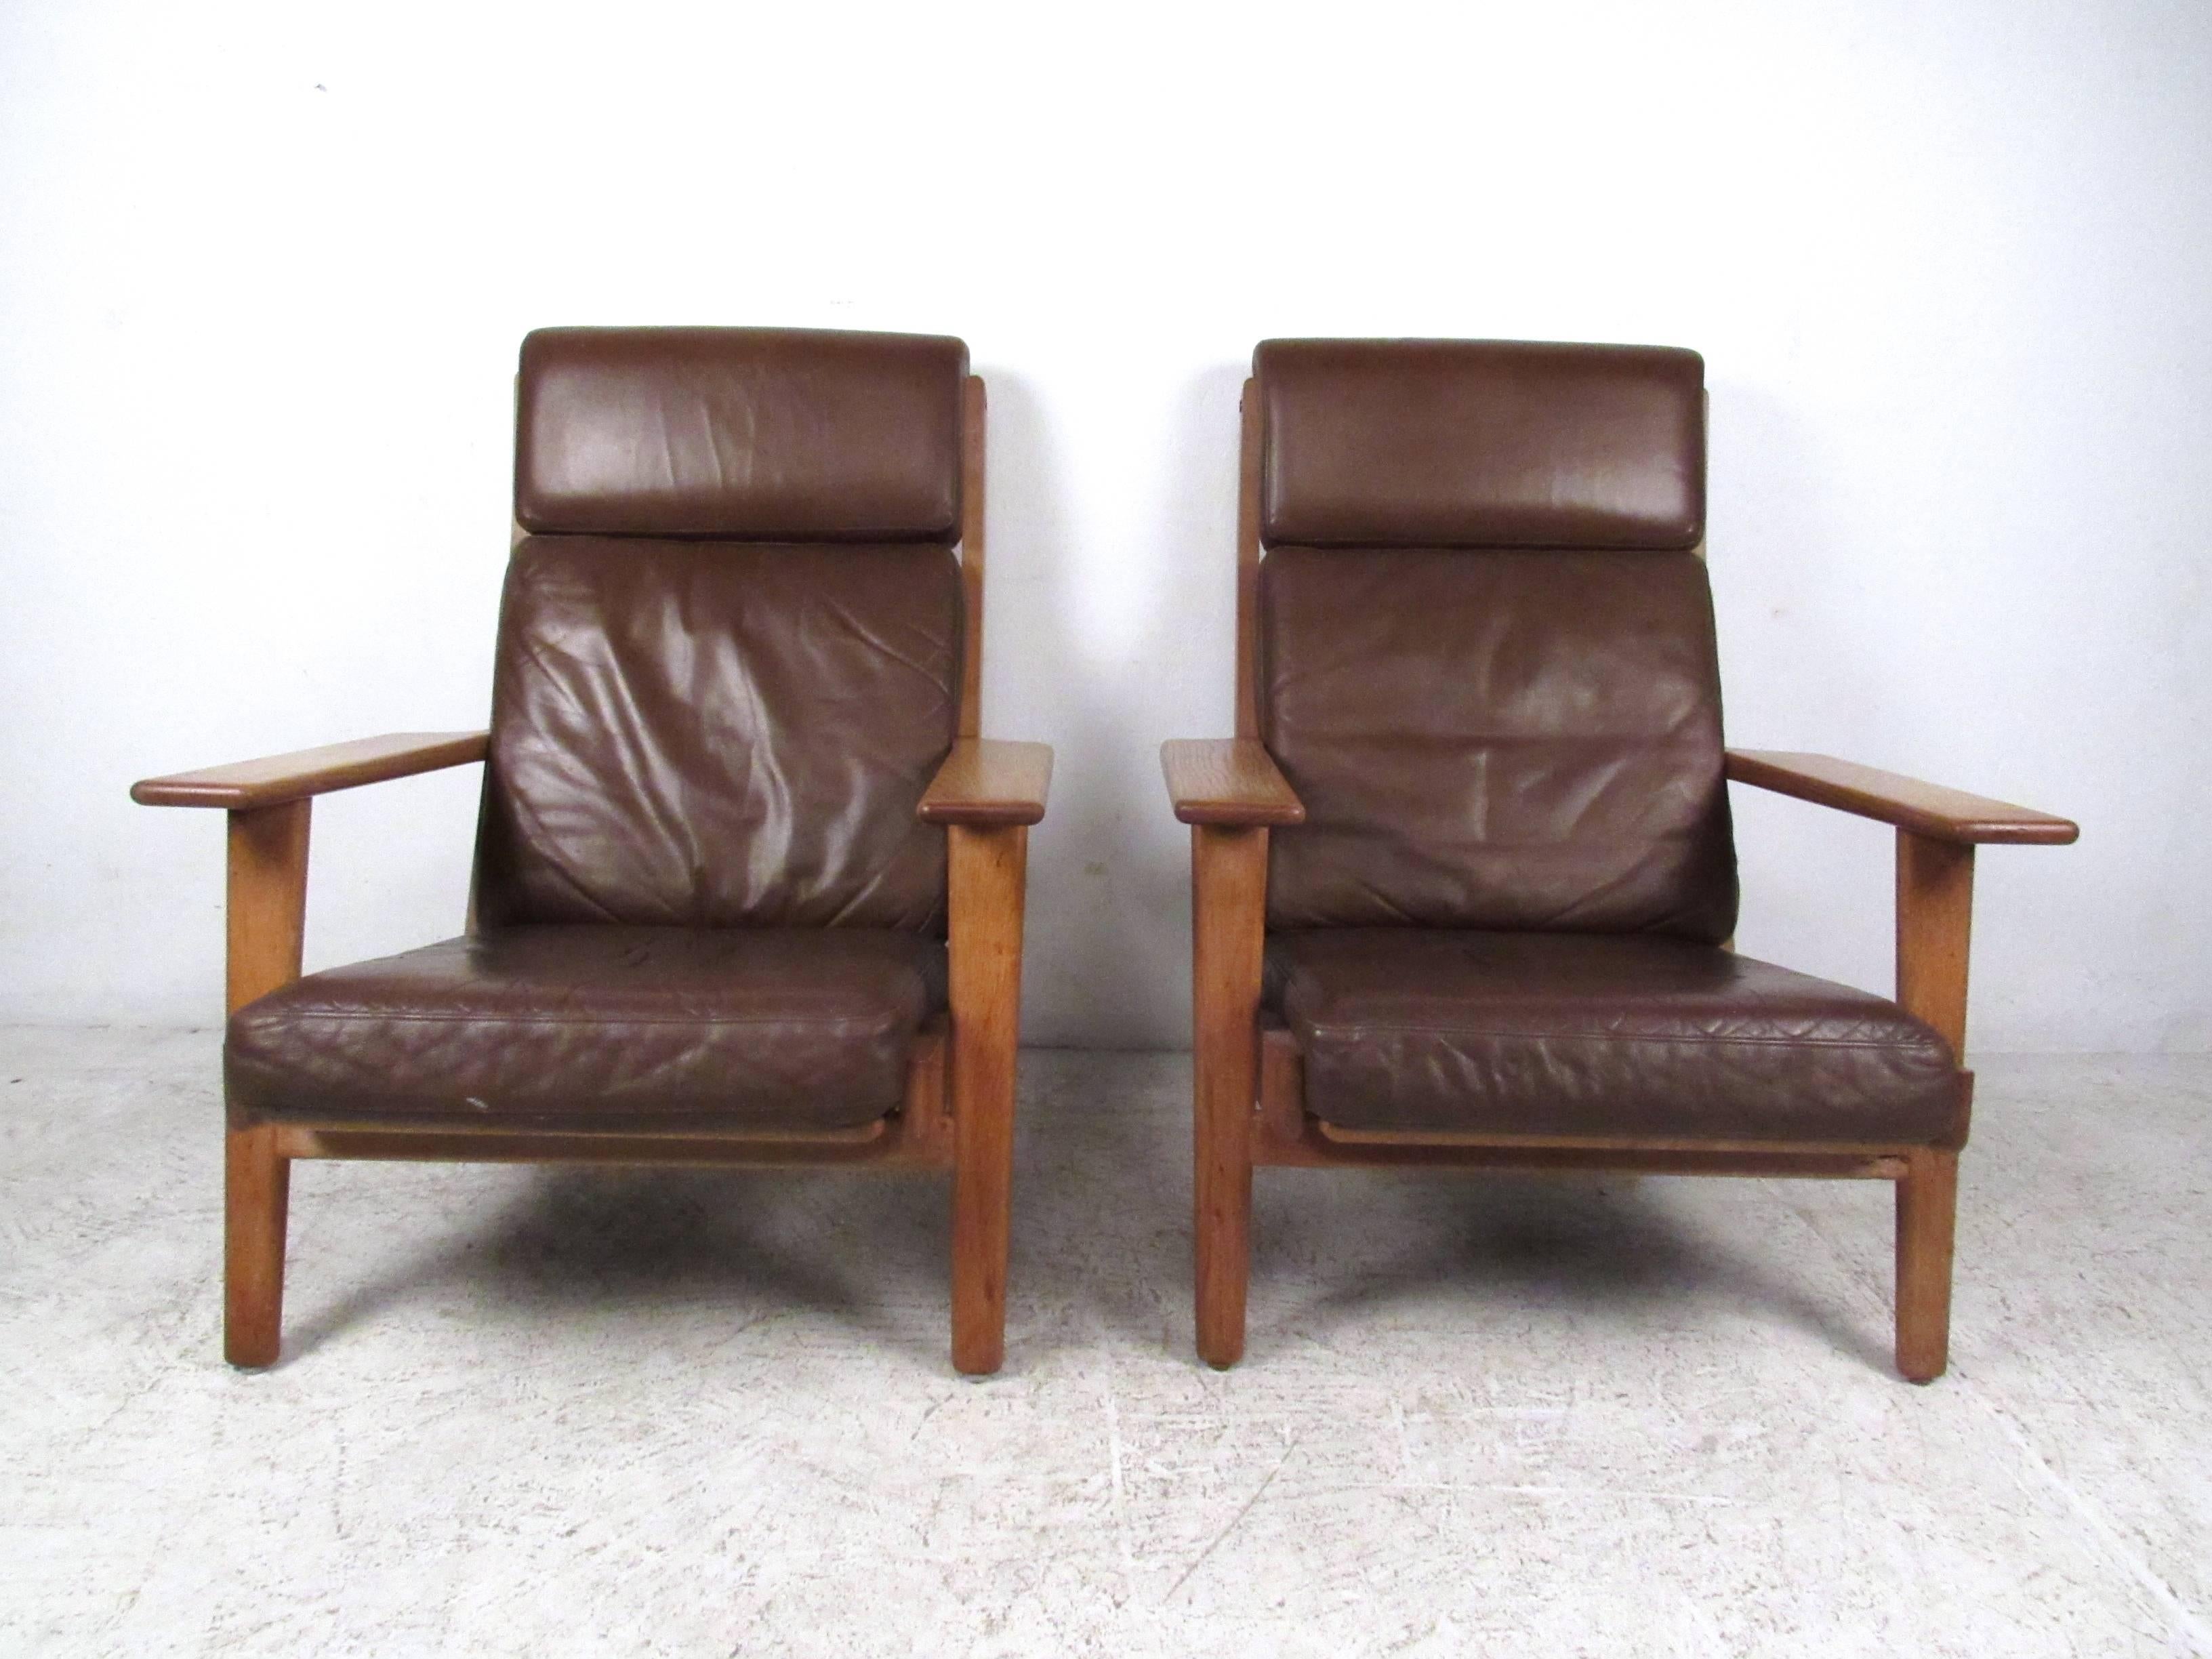 This beautiful vintage pair of brown leather lounge chairs feature the unique Mid-Century style of Hans Wegner. Slat backs, wide hardwood armrests and serpentine spring seats make this stylish pair of Getama GE-290 chairs a wonderful mix of comfort